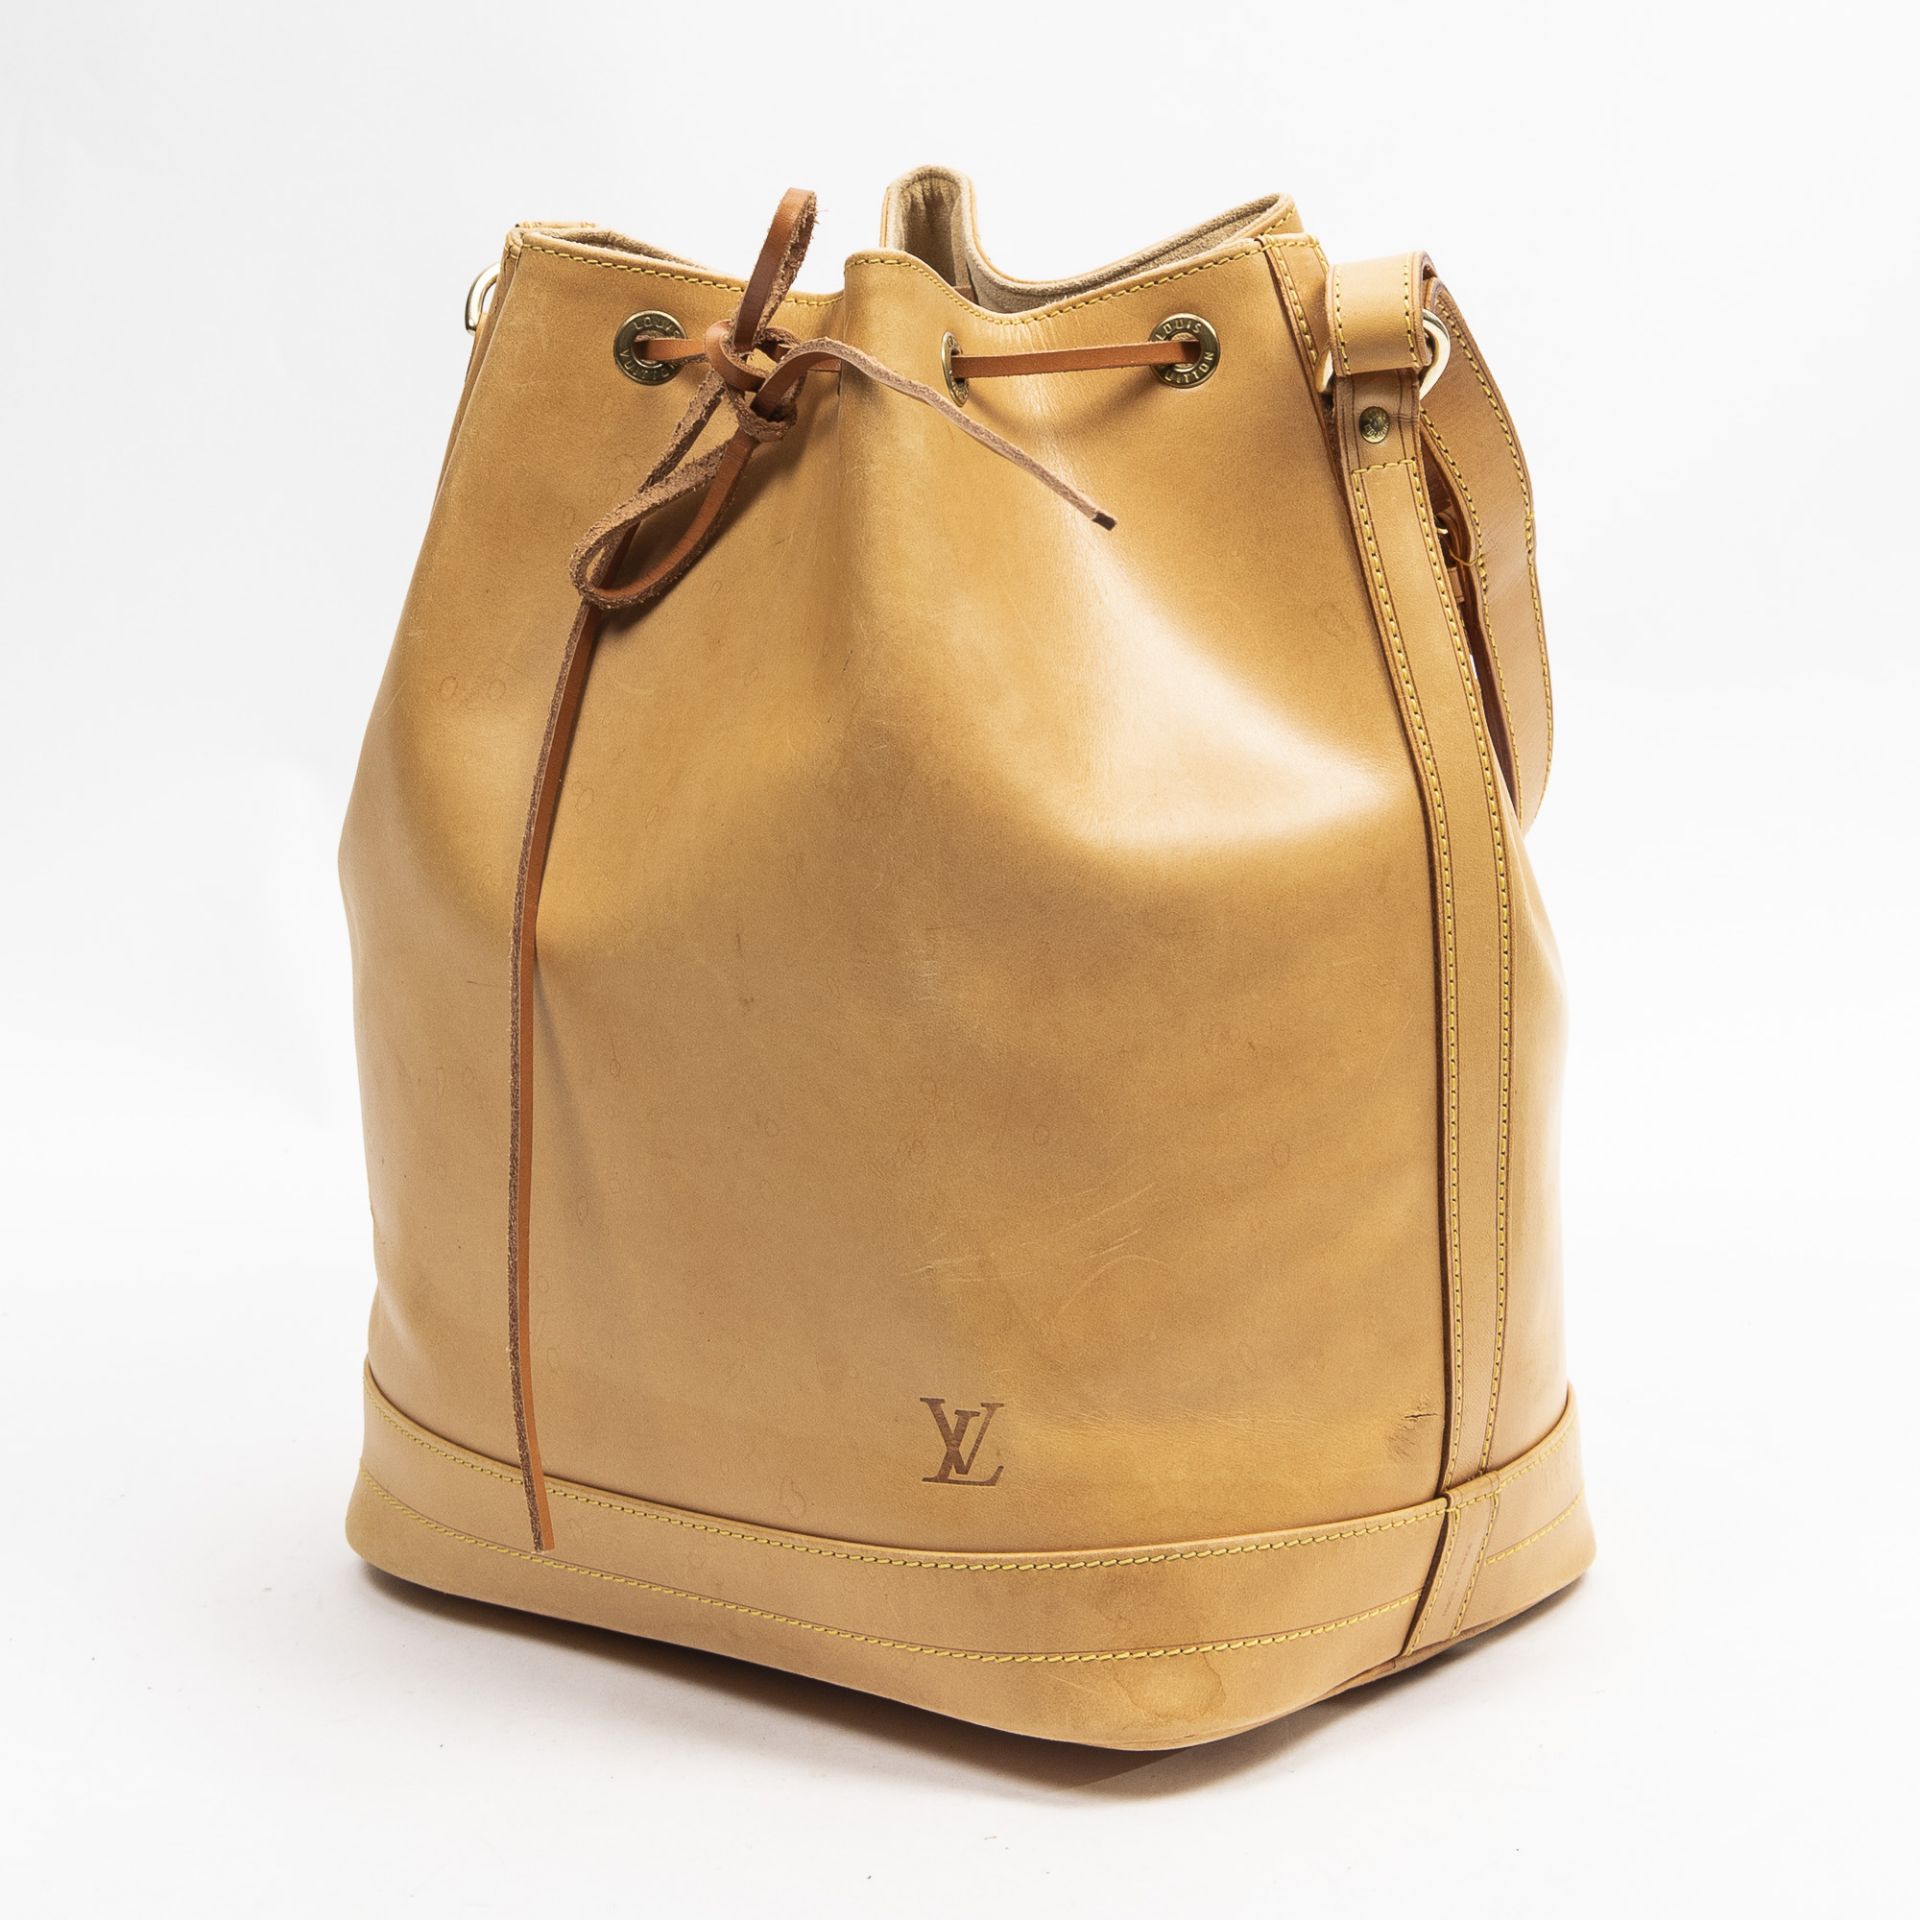 RRP £1,200.00 Lot To Contain 1 Louis Vuitton Calf Leather Rare Vintage Noe Shoulder Bag In Gold - - Image 2 of 3